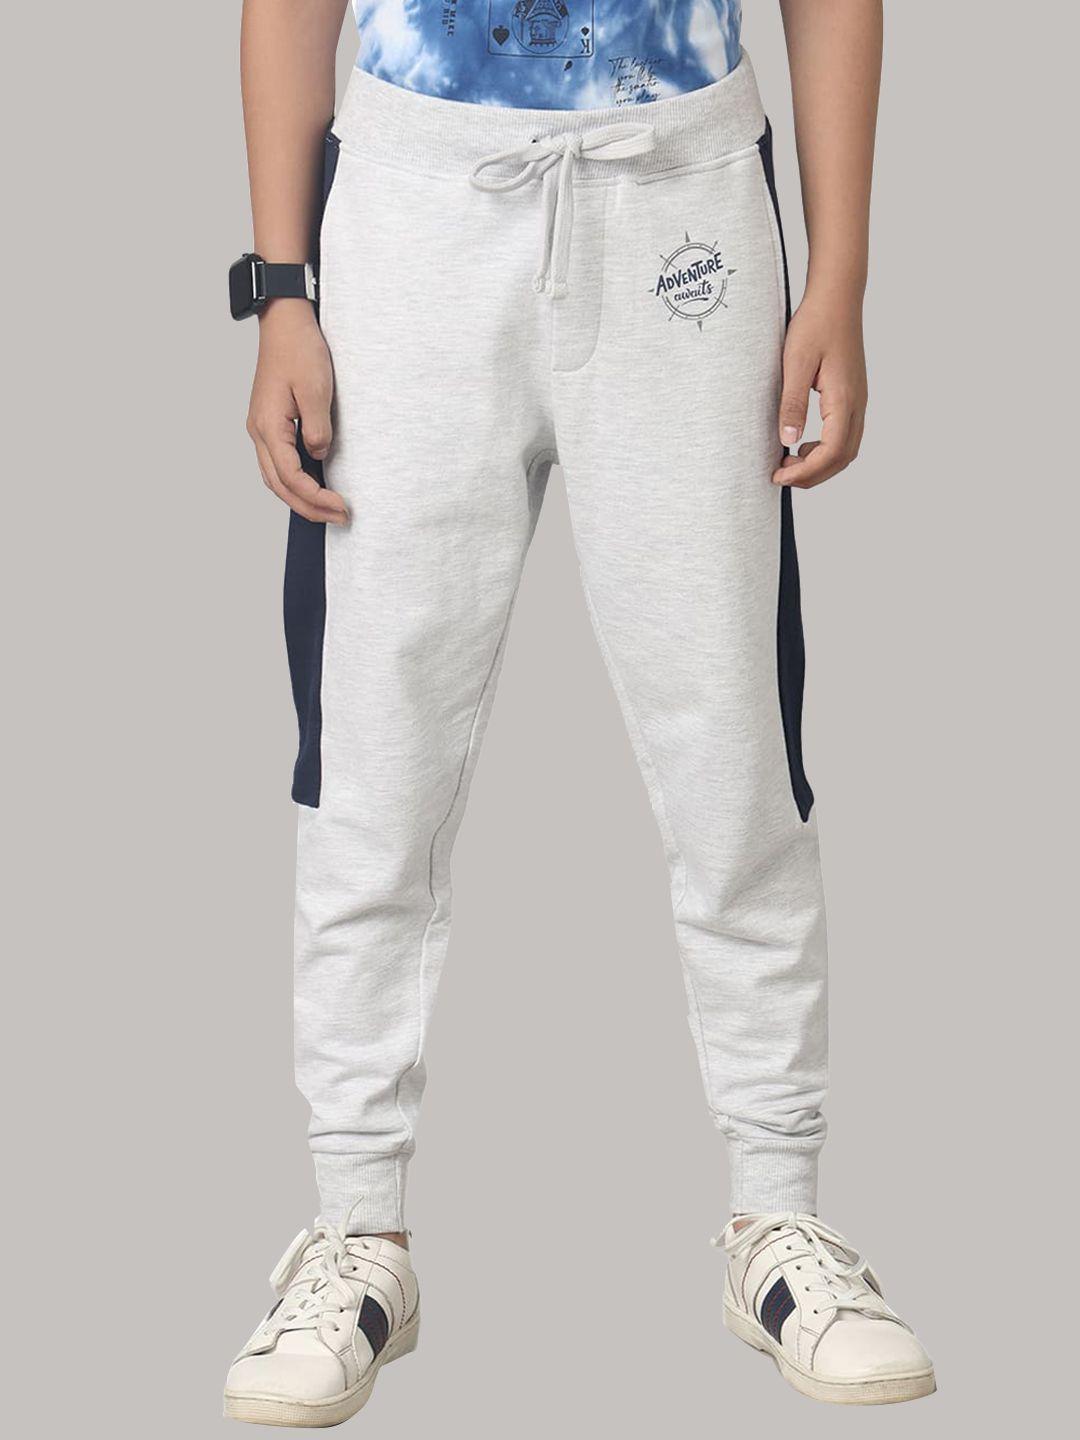 under fourteen only boys joggers trousers